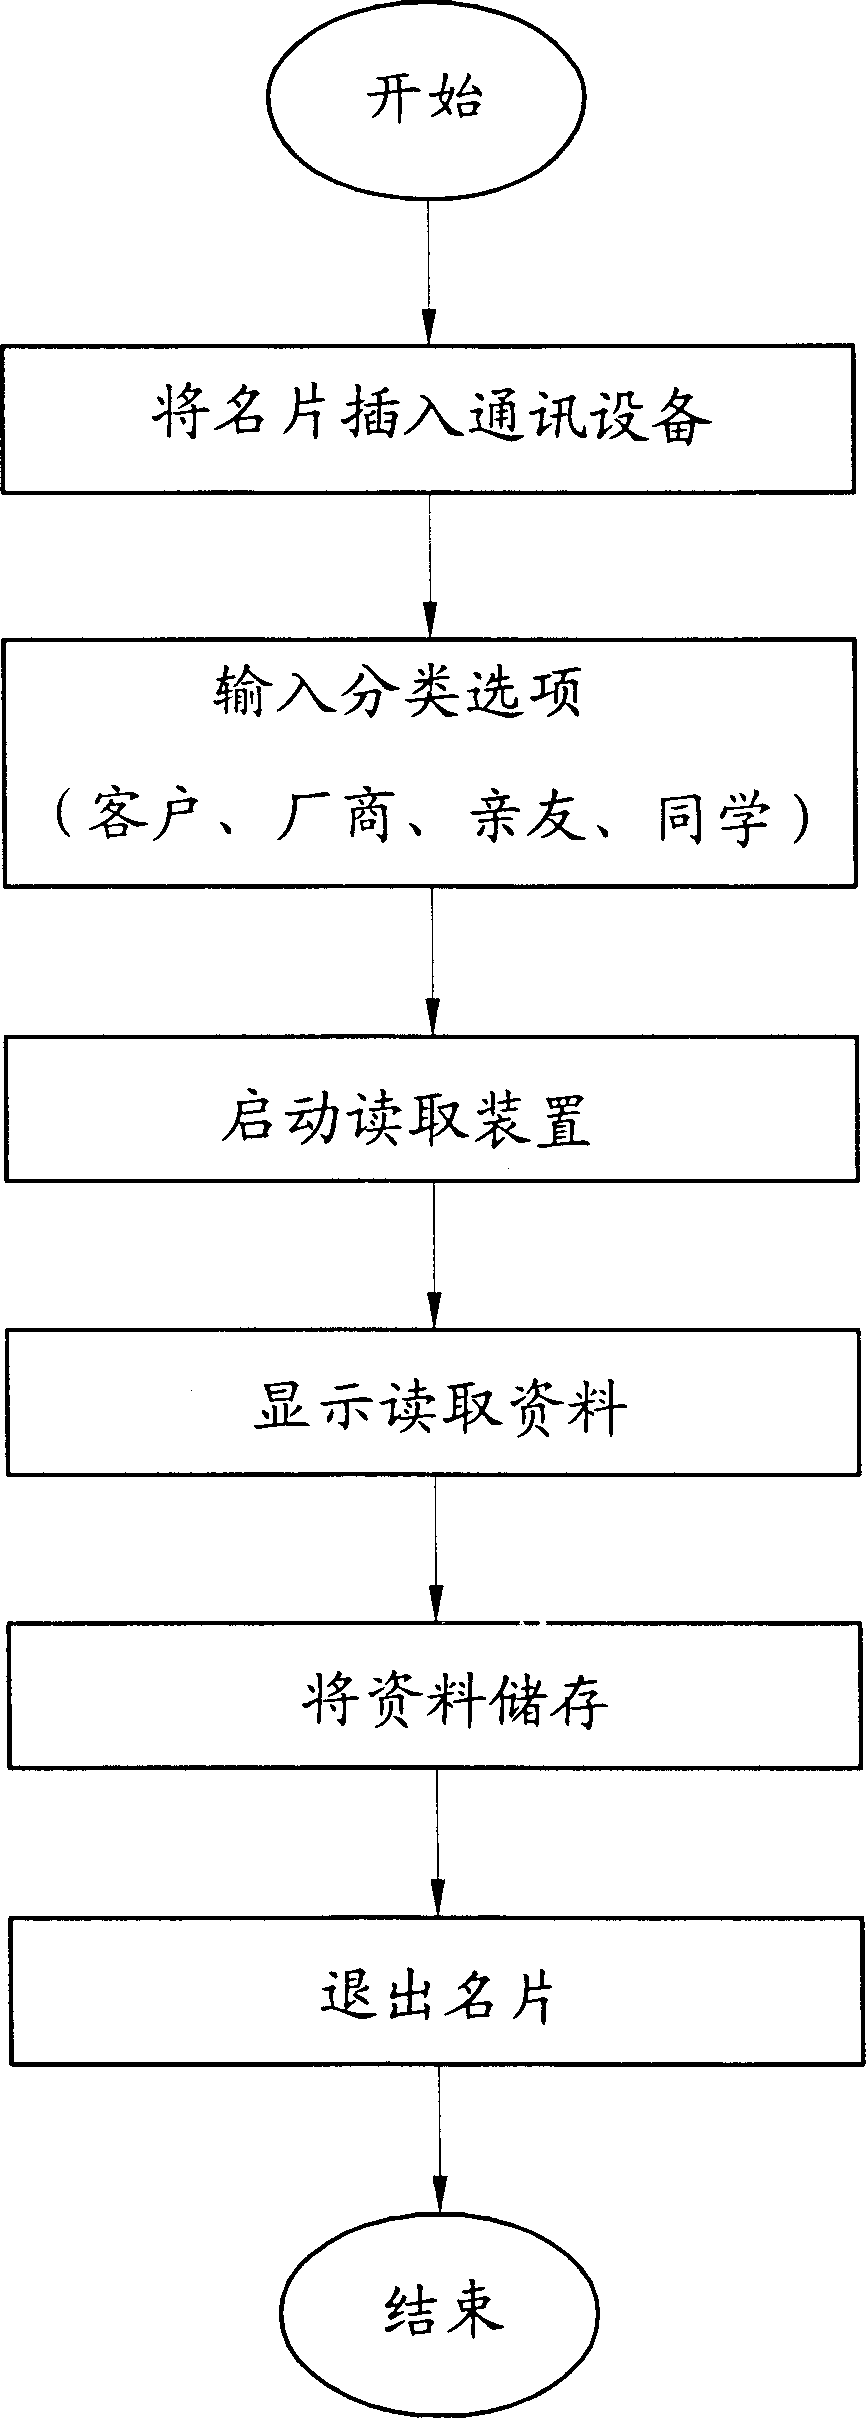 Communication equipment with the function fo reading name card data and its usage